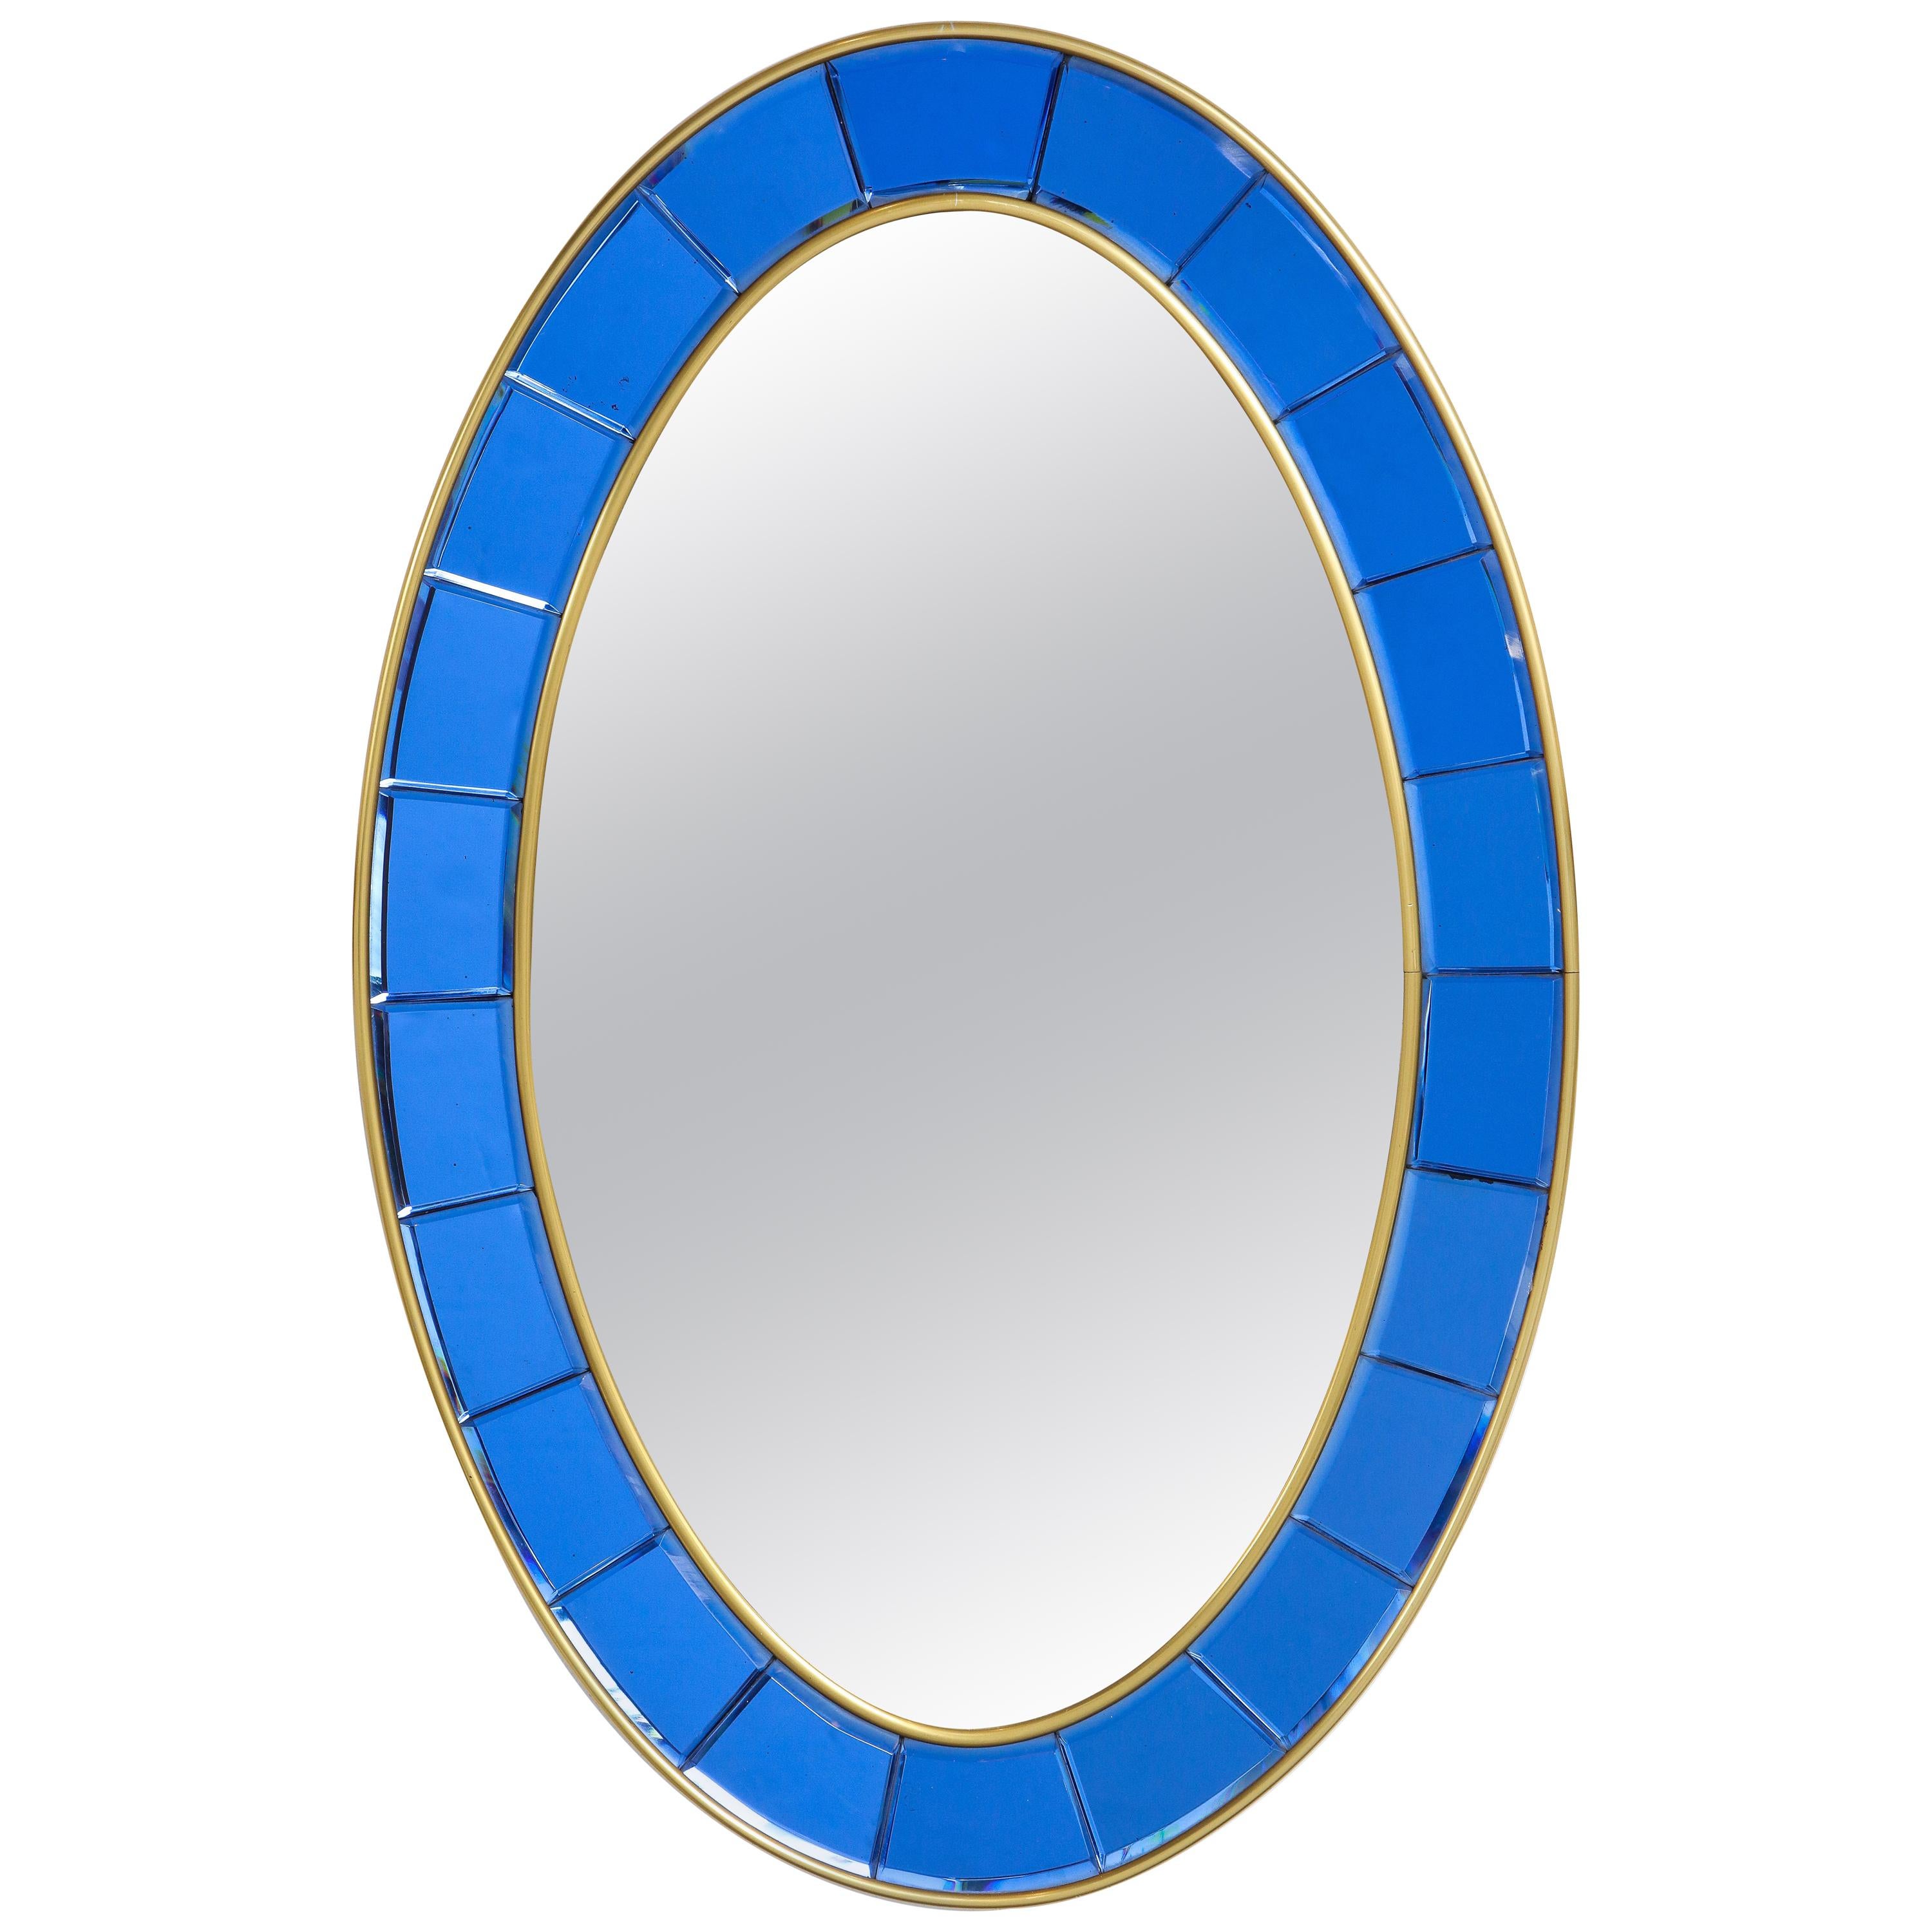 Cristal Art Oval Blue Hand-Cut Beveled Glass Mirror For Sale